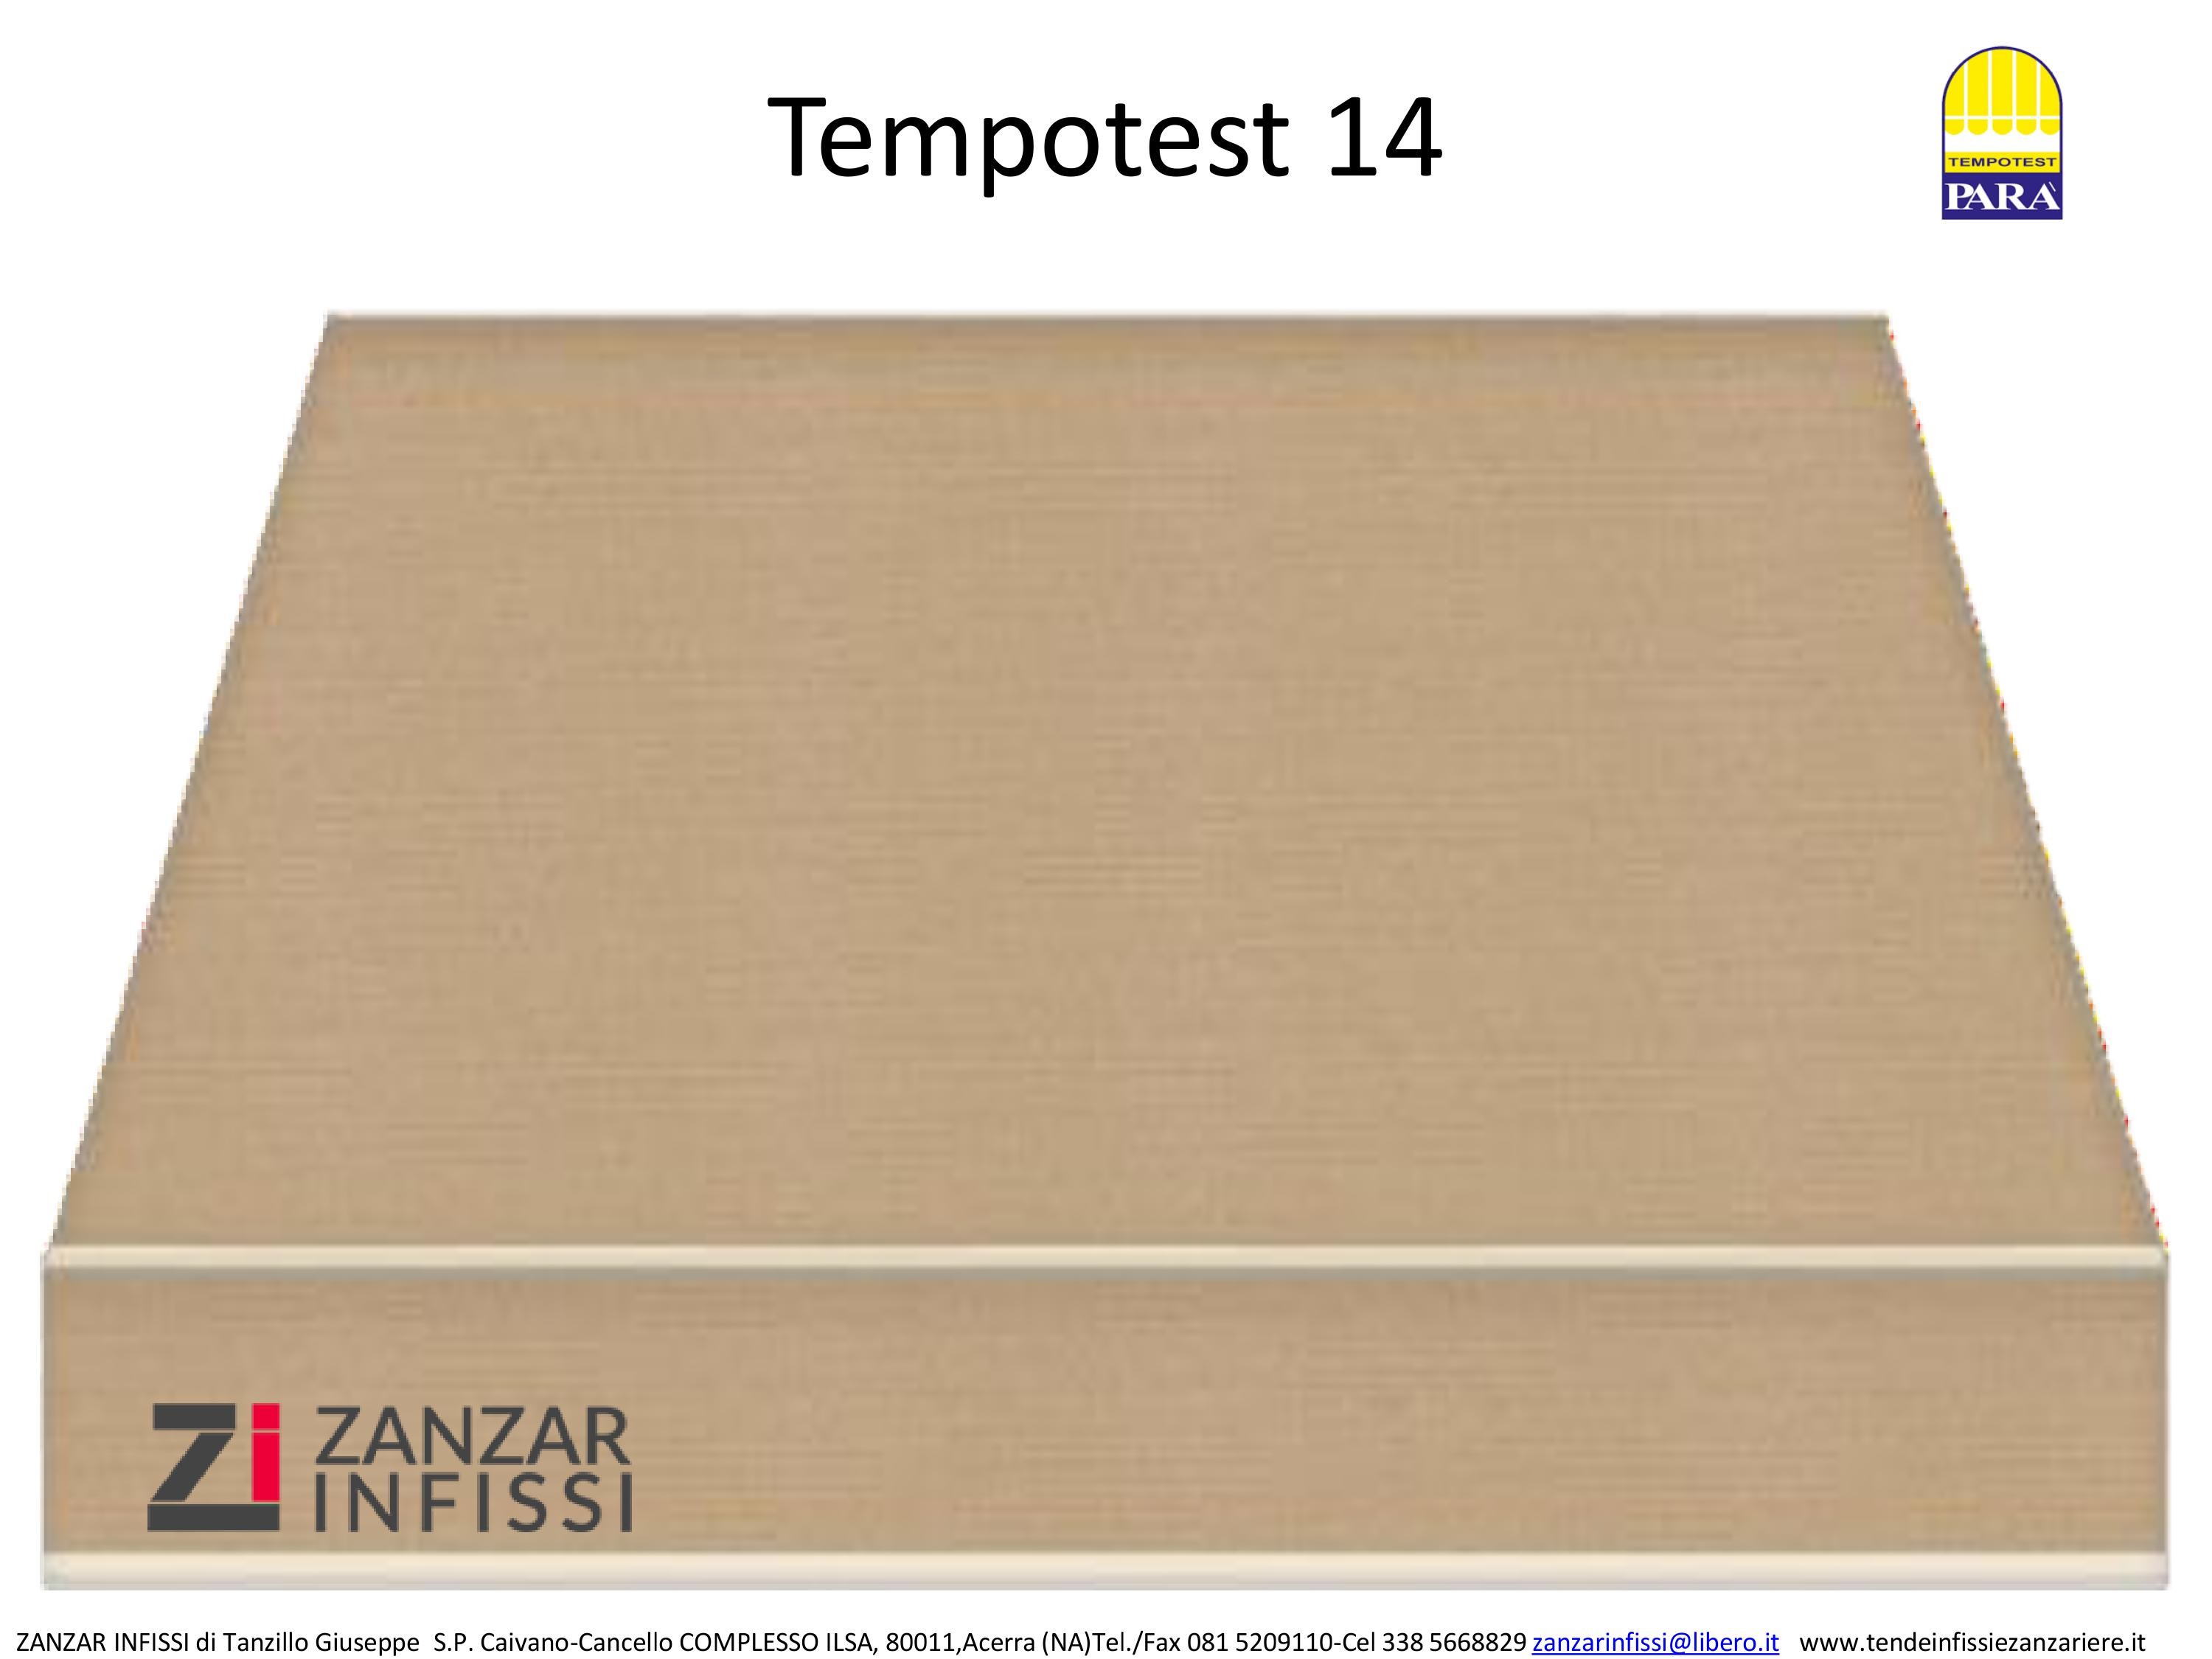 Tempotest 14